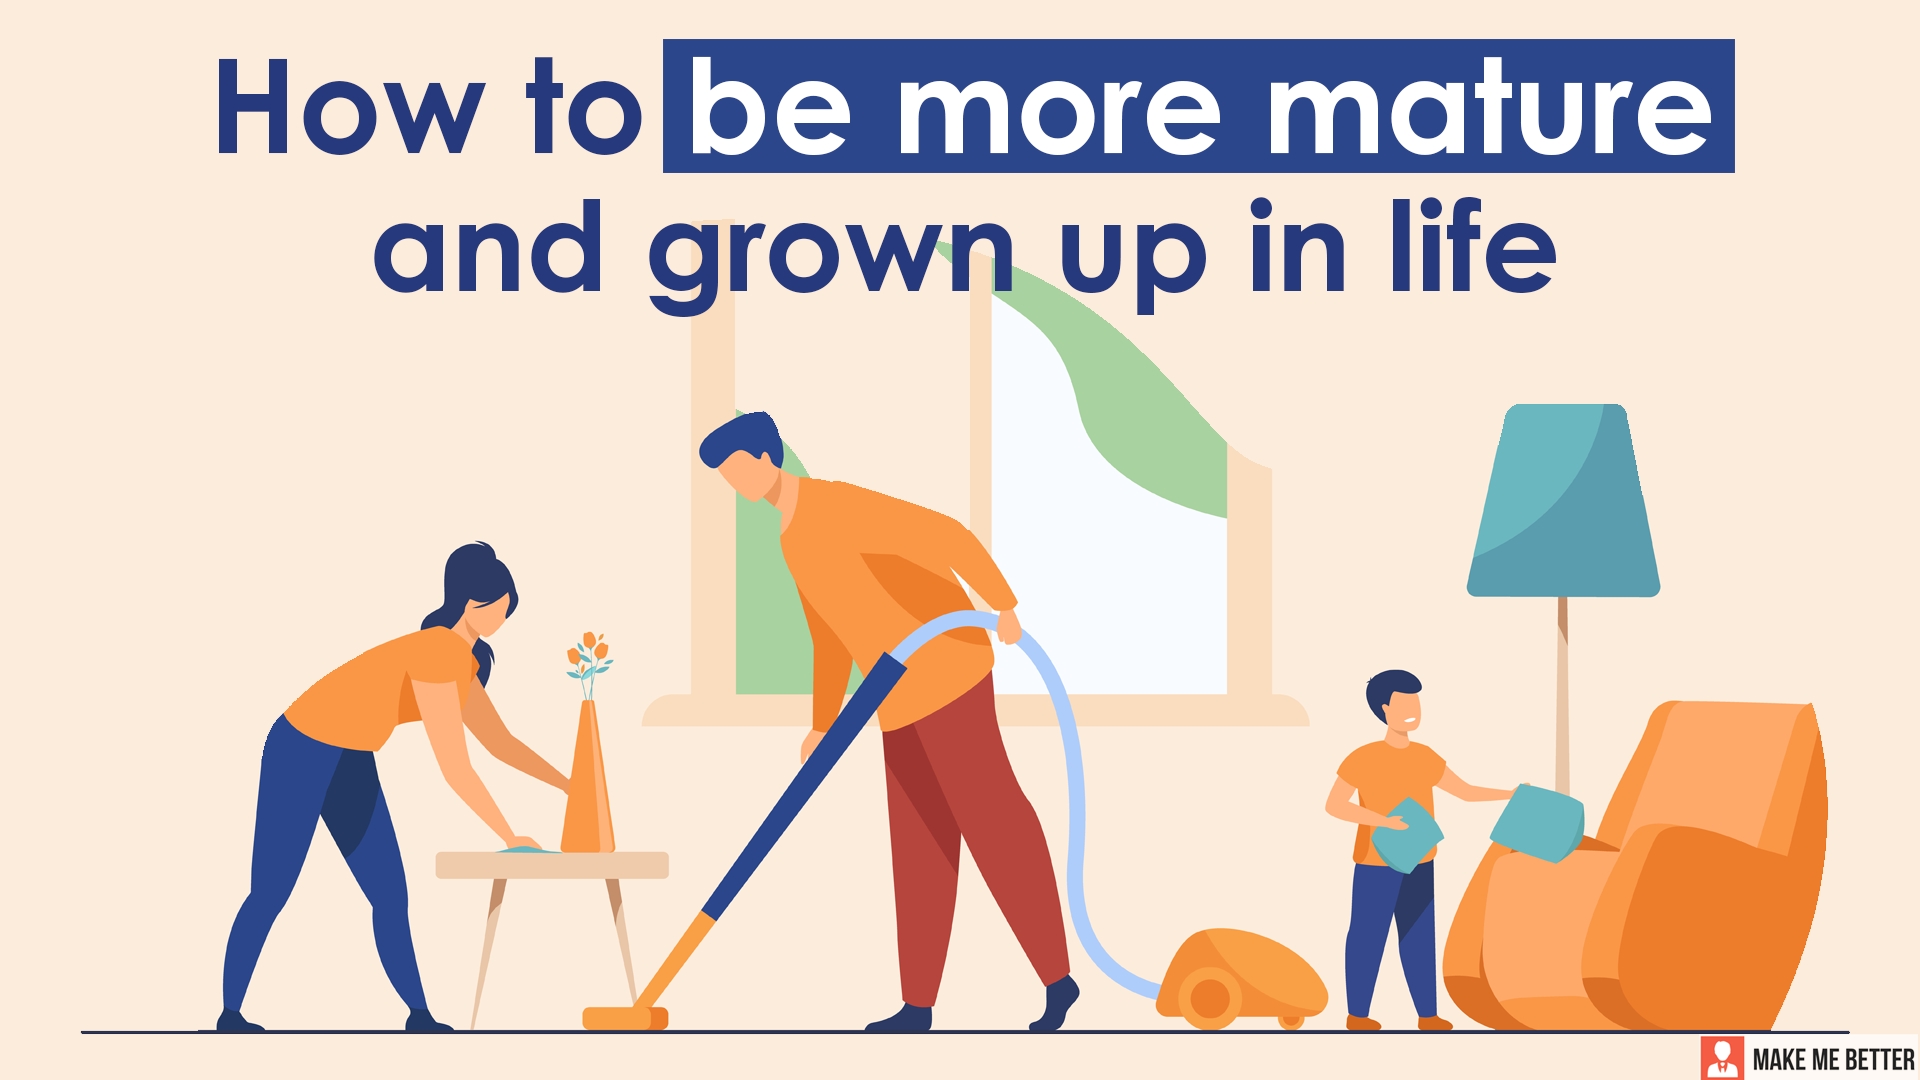 be more mature and grown up in life